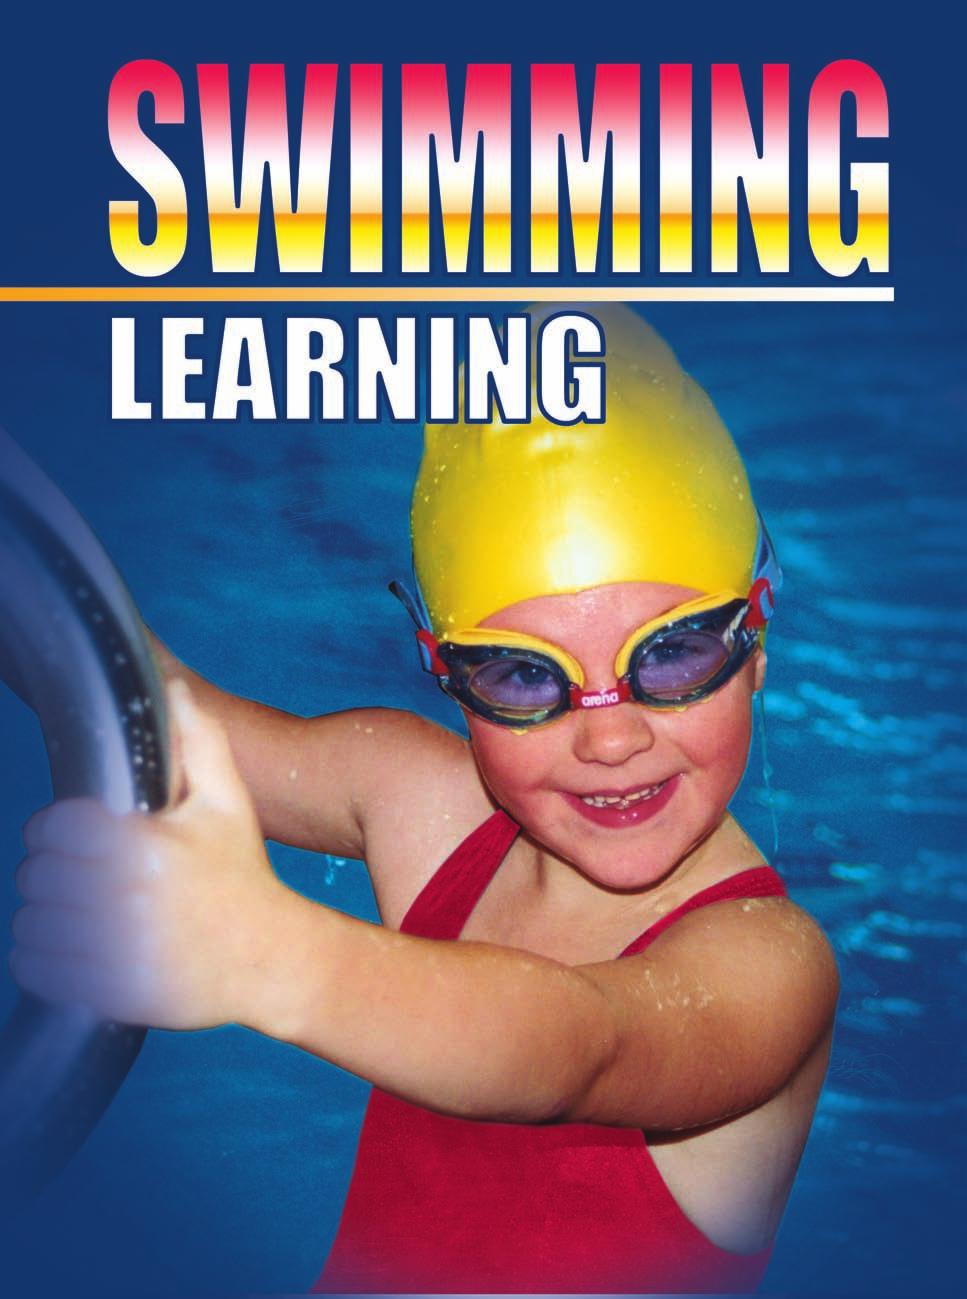 This book is written for all children who want to learn how to swim.